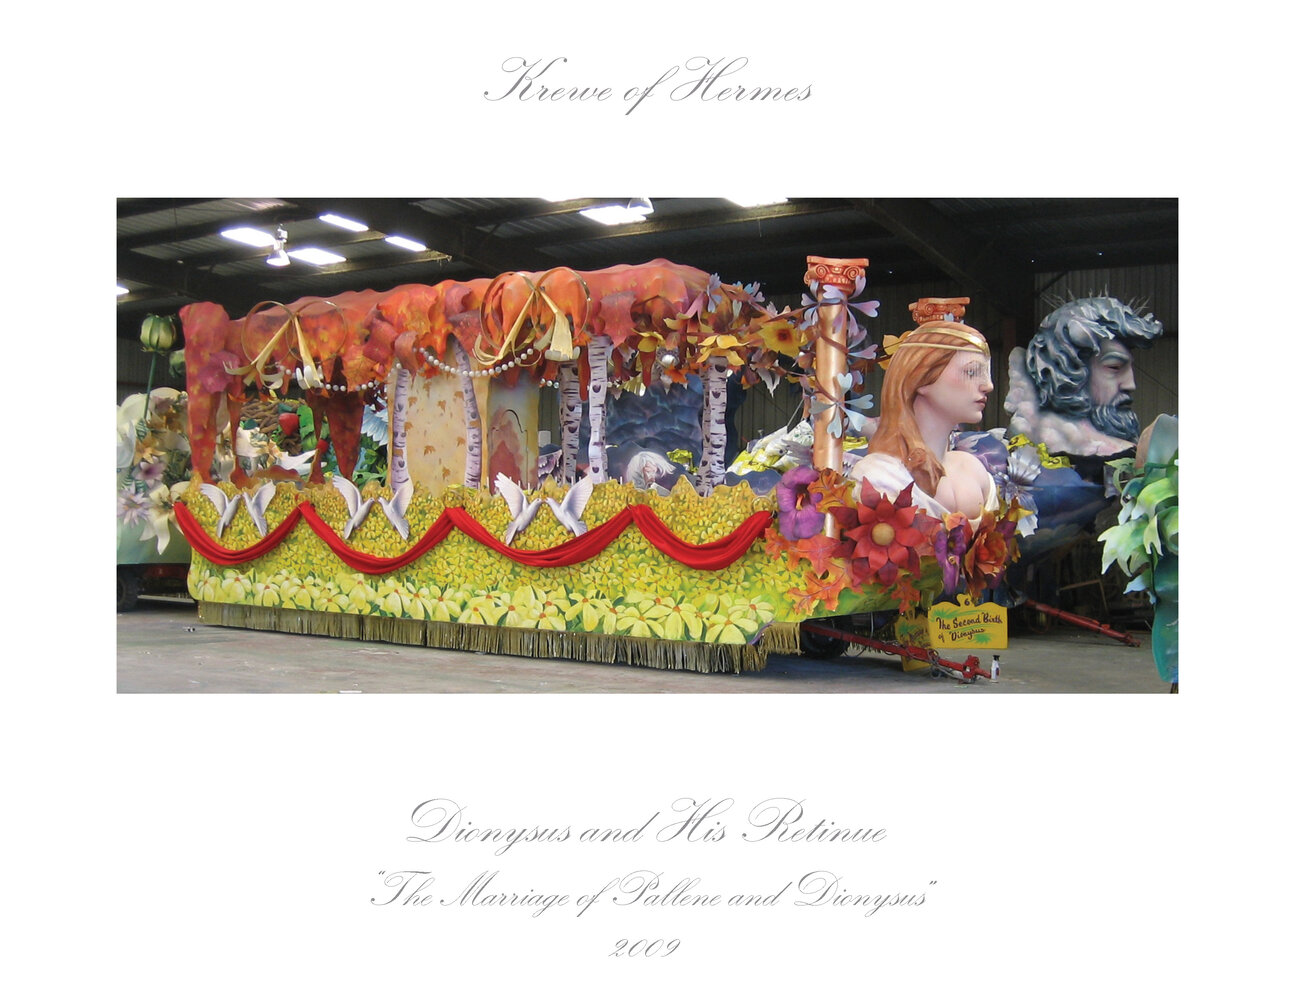 19.The Marriage of Pallene and Dionysus for the Krewe of Hermes.jpg